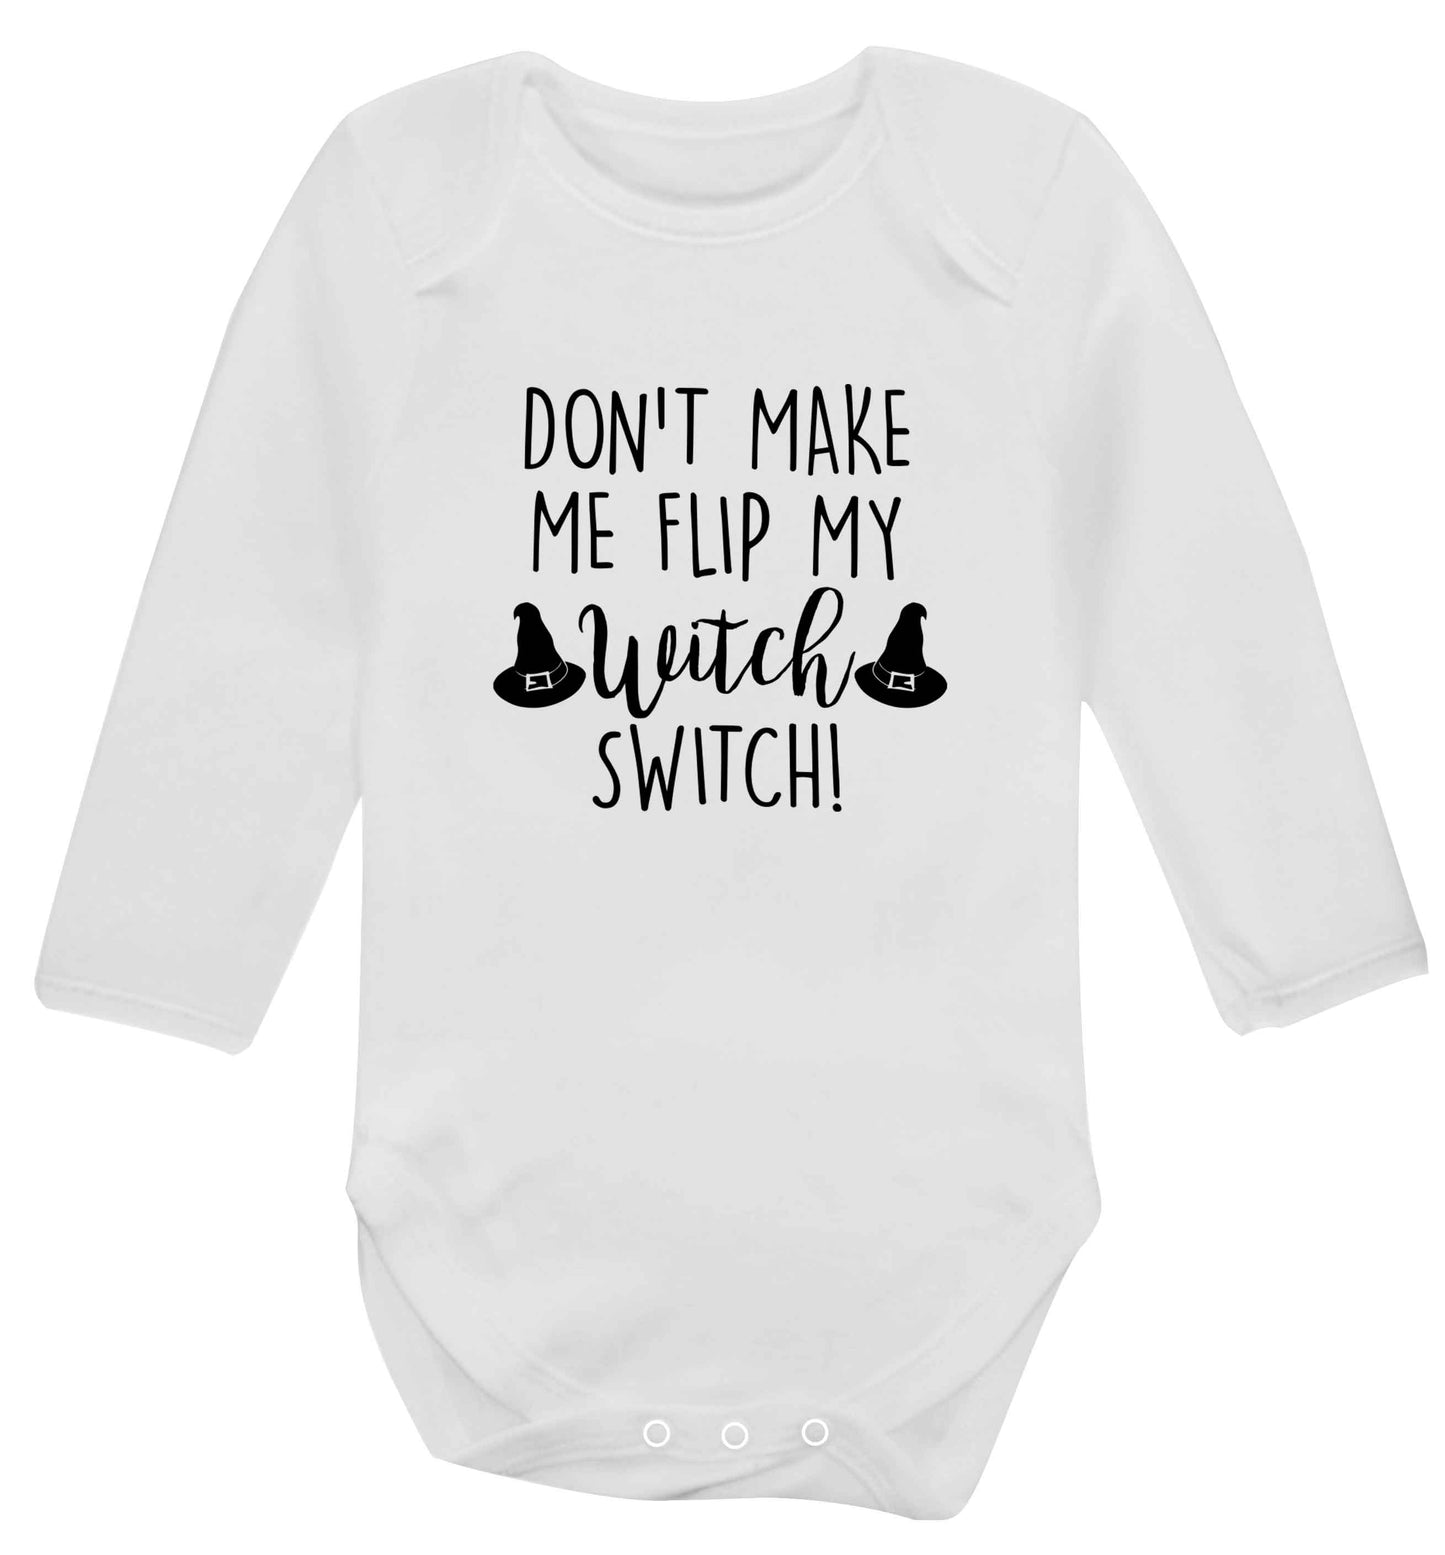 Don't make me flip my witch switch baby vest long sleeved white 6-12 months